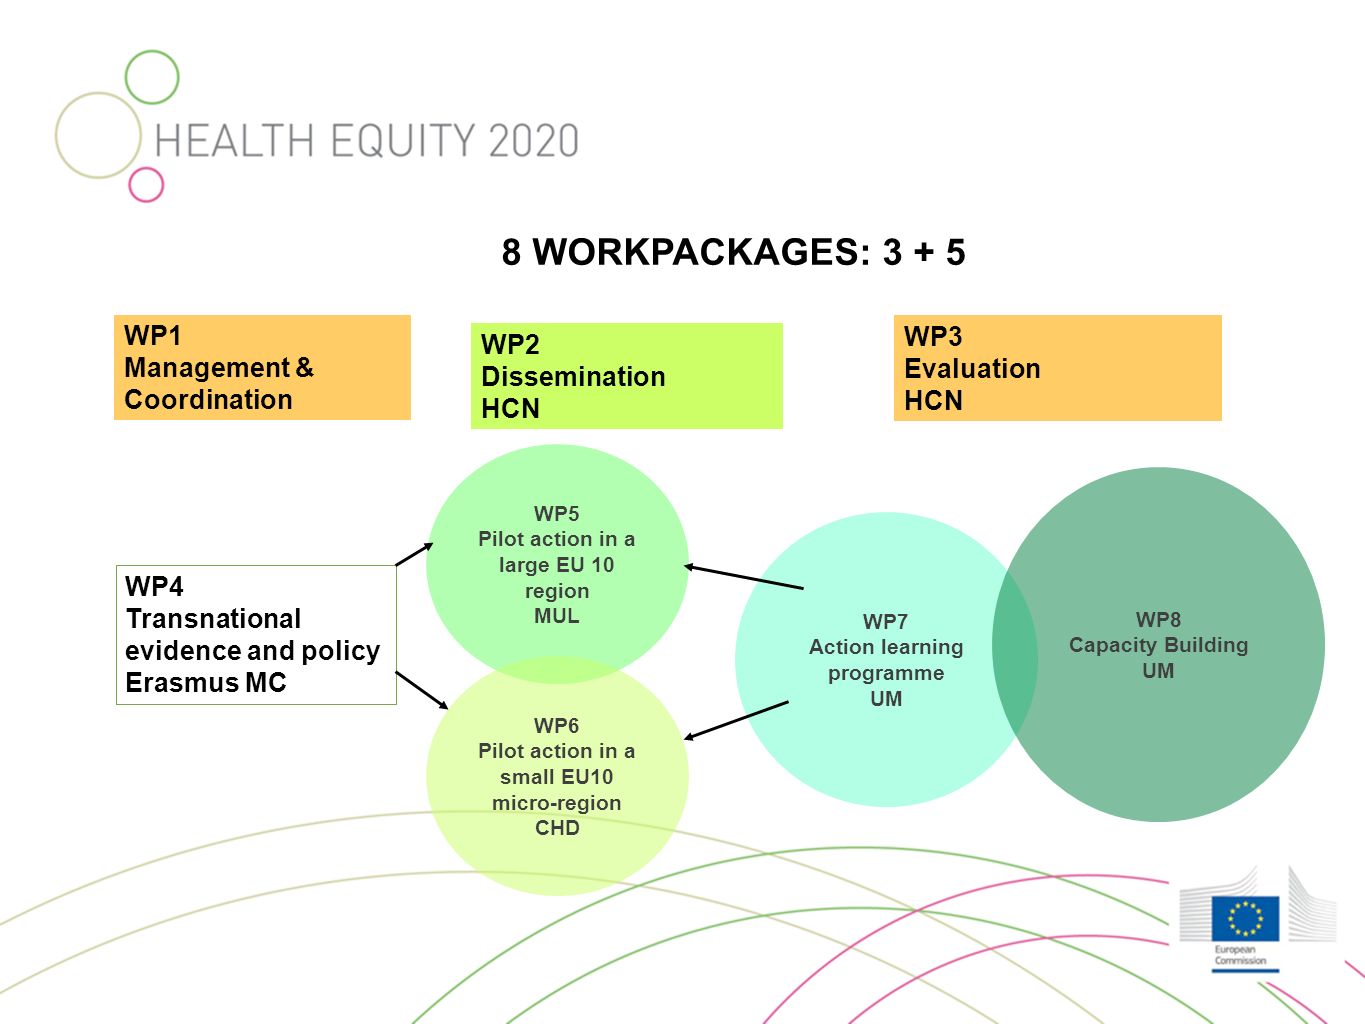 8 WORKPACKAGES: WP5 Pilot action in a large EU 10 region MUL WP7 Action learning programme UM WP6 Pilot action in a small EU10 micro-region CHD WP8 Capacity Building UM WP3 Evaluation HCN WP1 Management & Coordination WP2 Dissemination HCN WP4 Transnational evidence and policy Erasmus MC